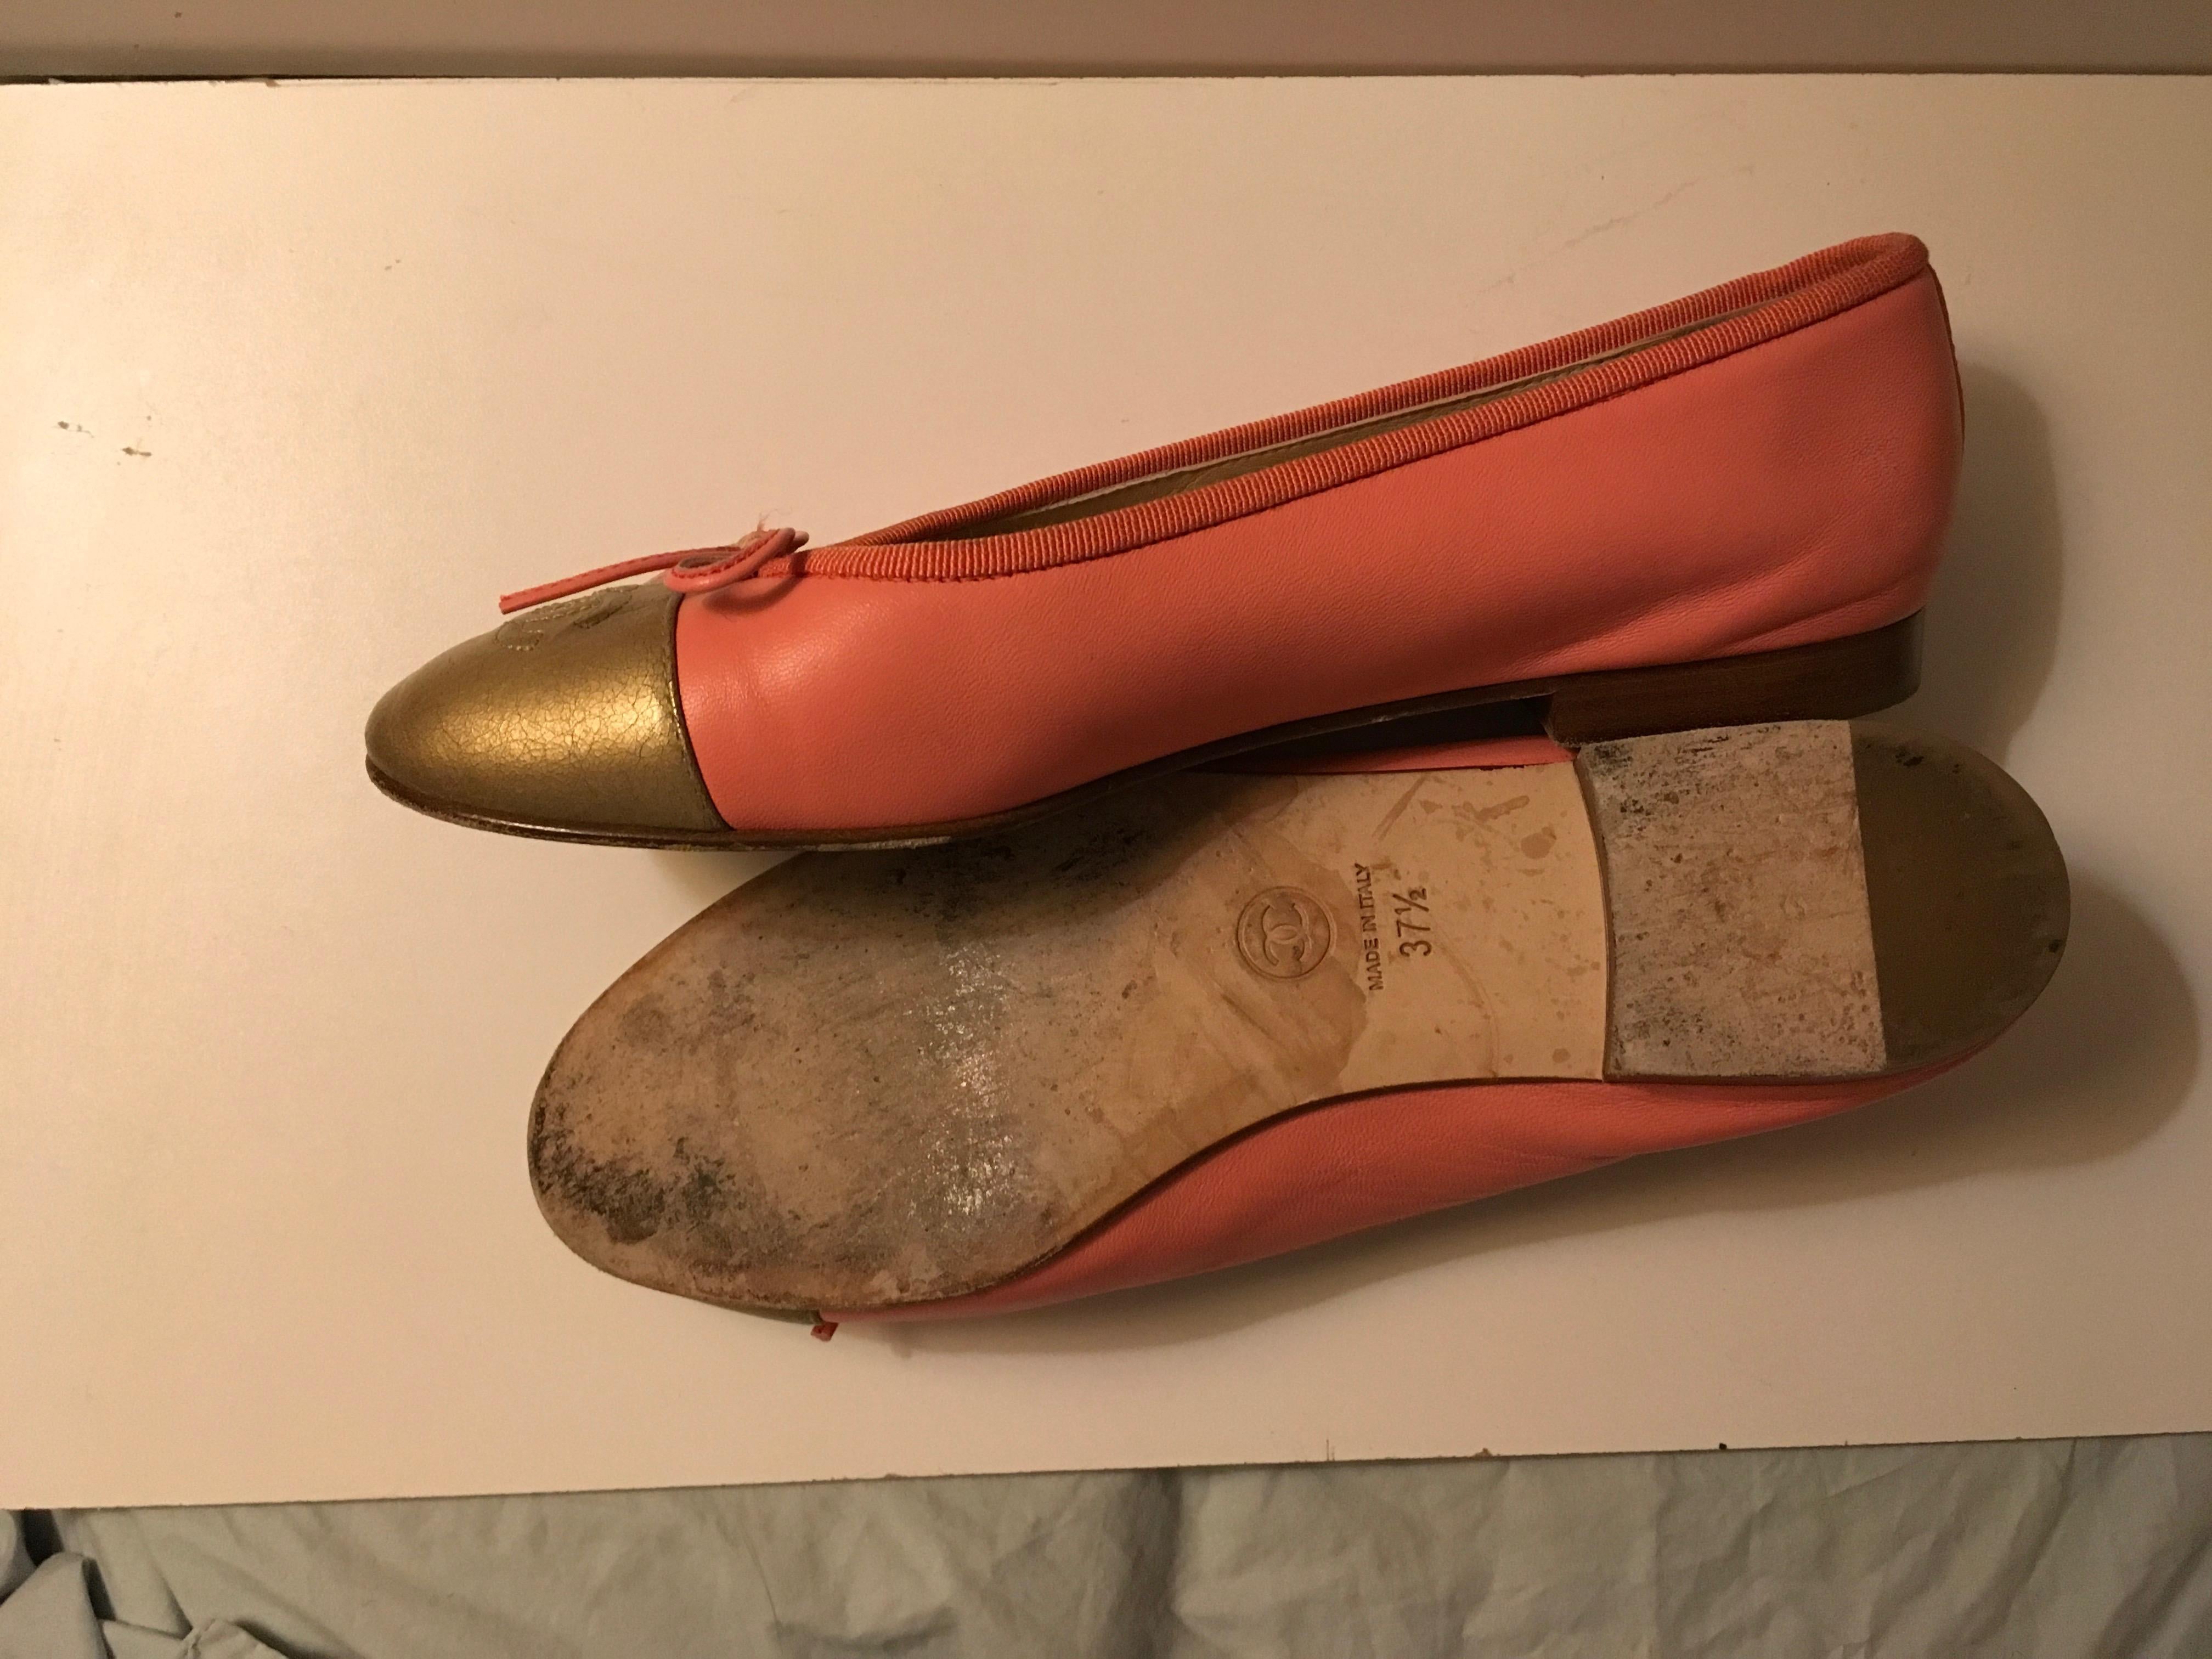 Chanel Ballerina Flats - Size 37.5  In Excellent Condition For Sale In Boca Raton, FL